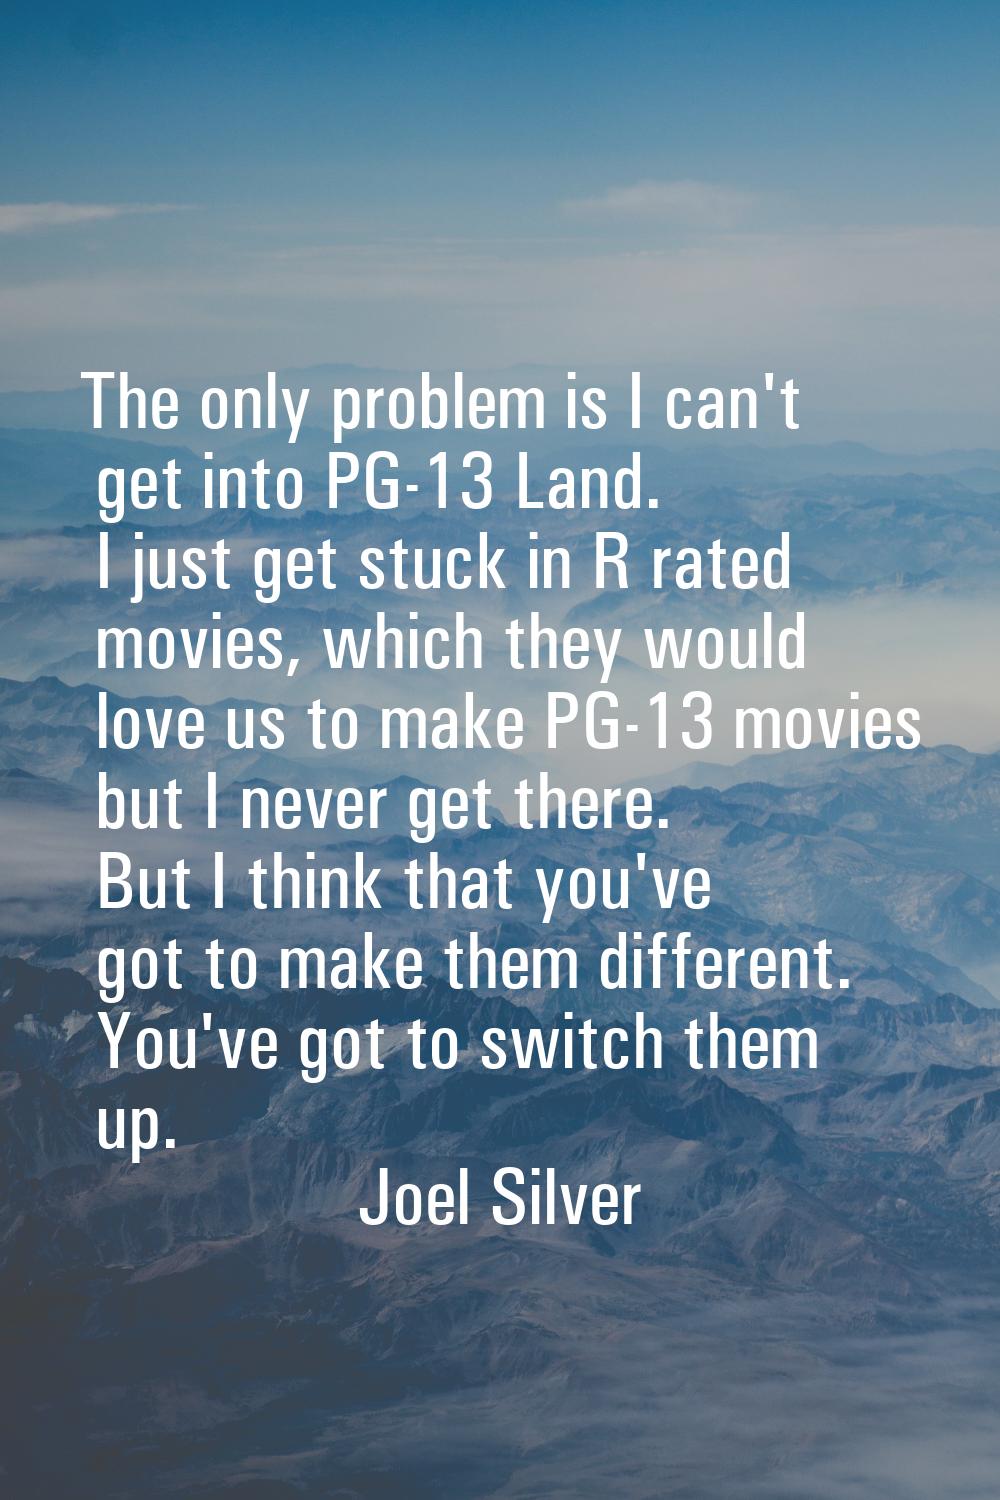 The only problem is I can't get into PG-13 Land. I just get stuck in R rated movies, which they wou